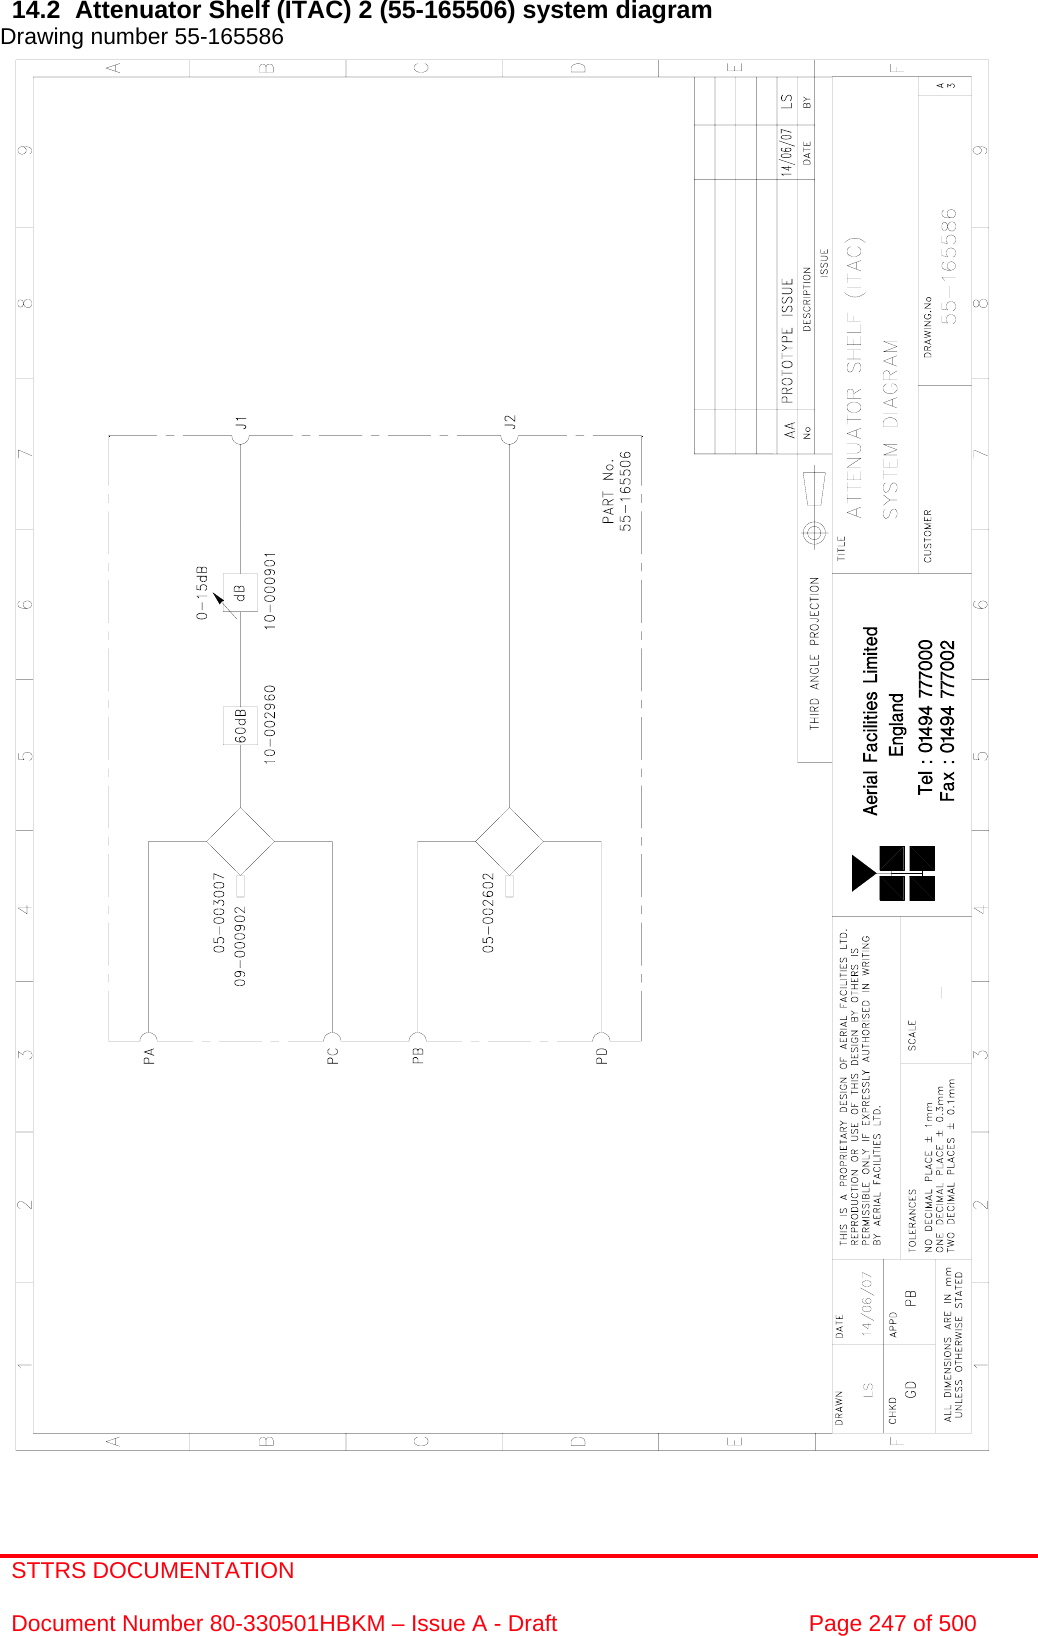 STTRS DOCUMENTATION  Document Number 80-330501HBKM – Issue A - Draft  Page 247 of 500   14.2  Attenuator Shelf (ITAC) 2 (55-165506) system diagram  Drawing number 55-165586                                                       